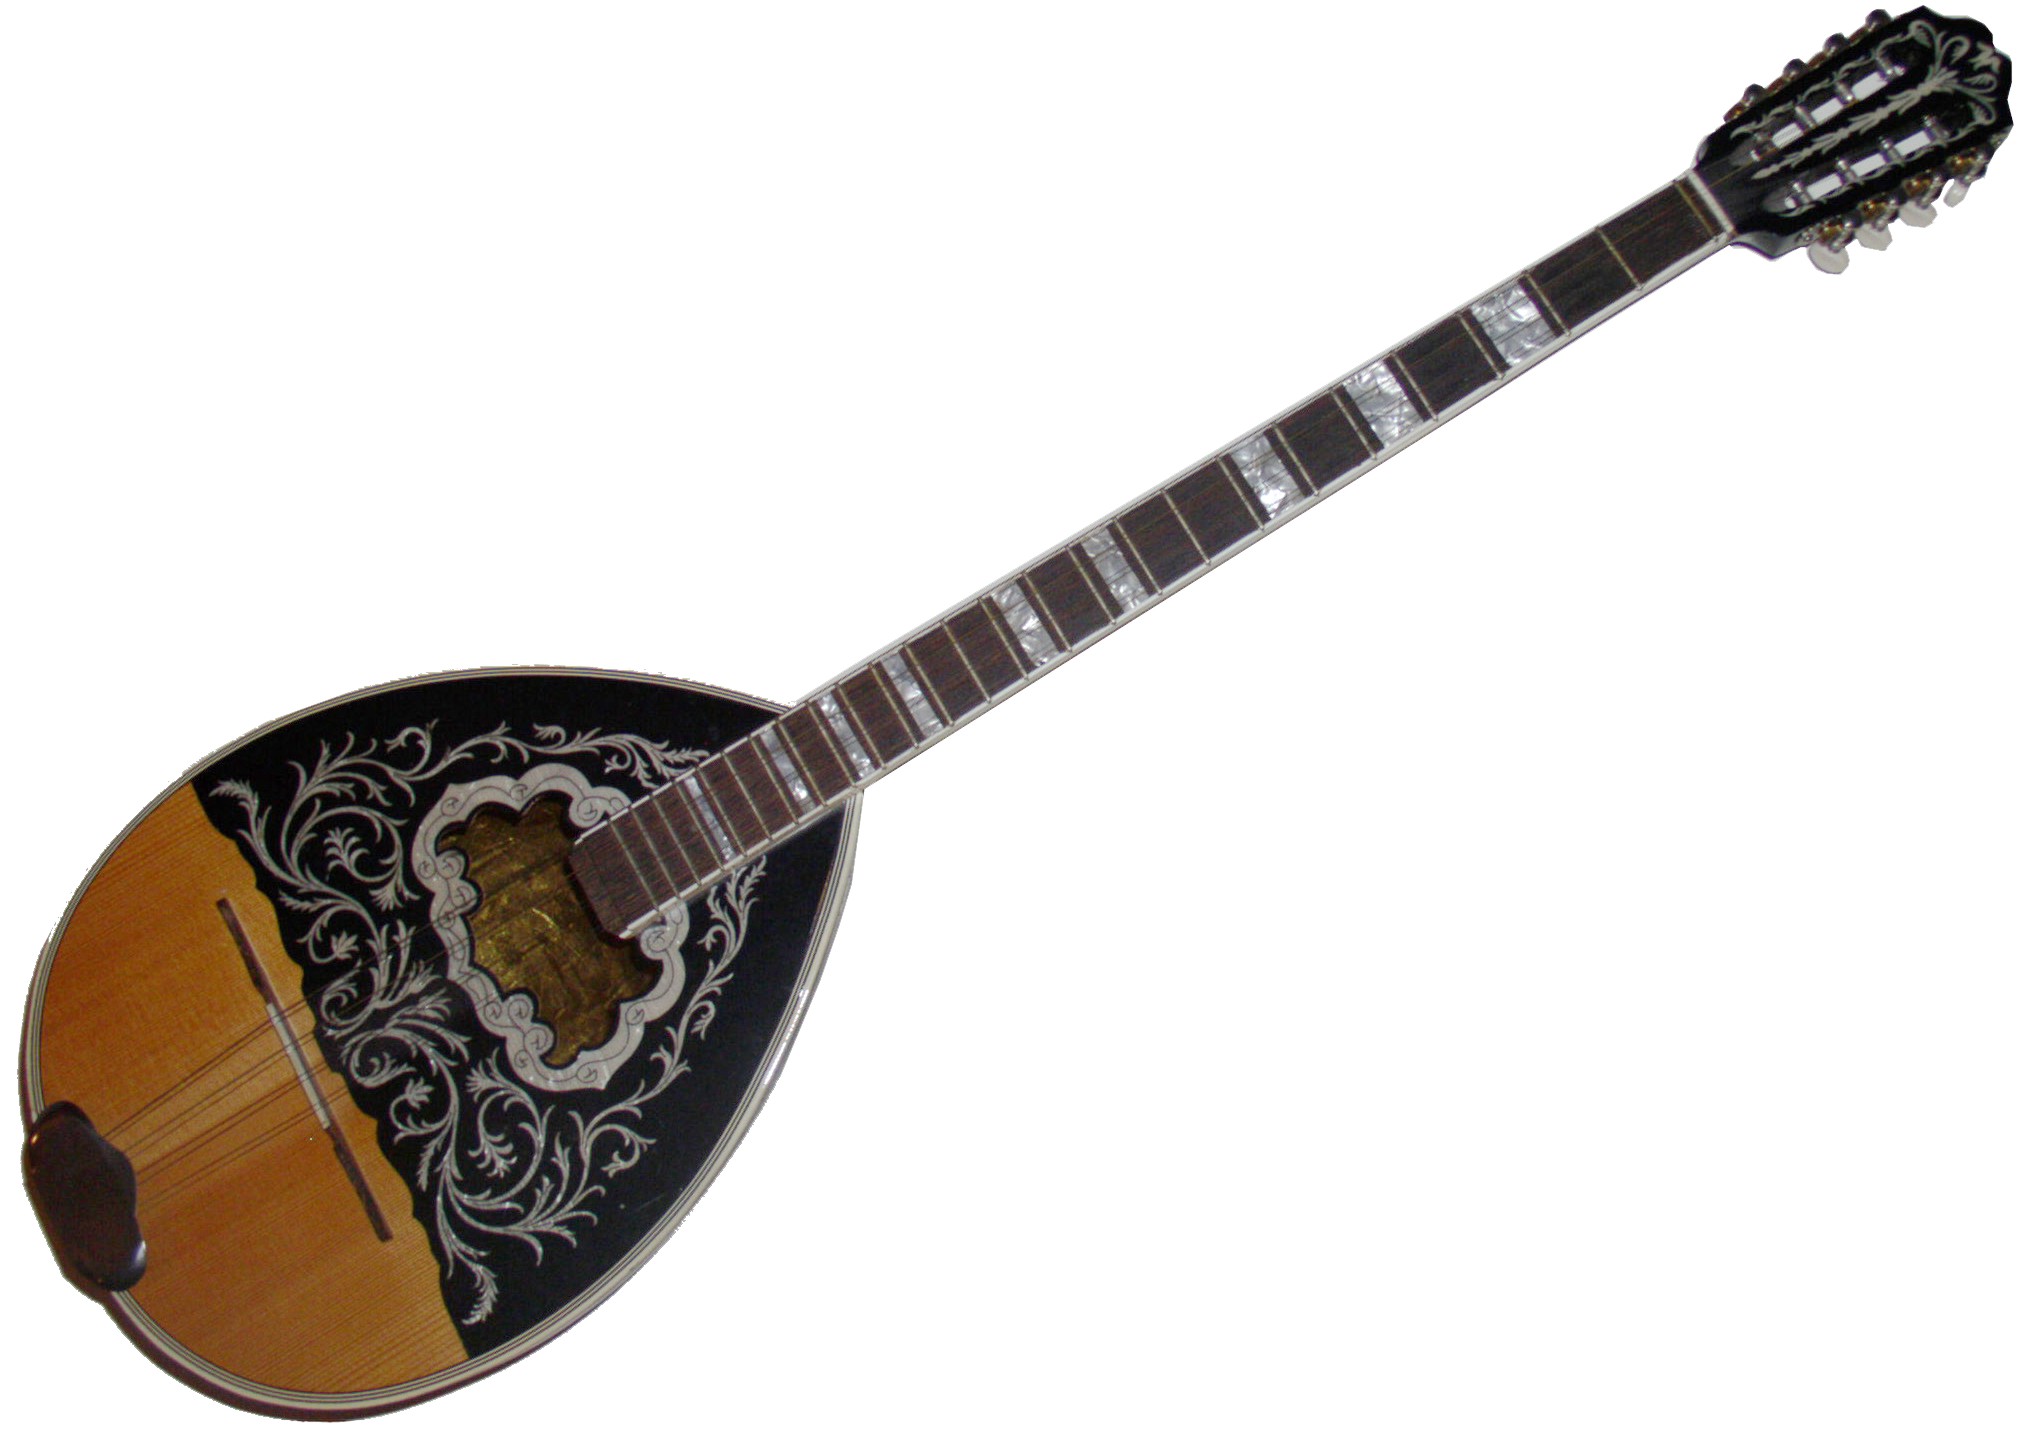 National instrument of Greece